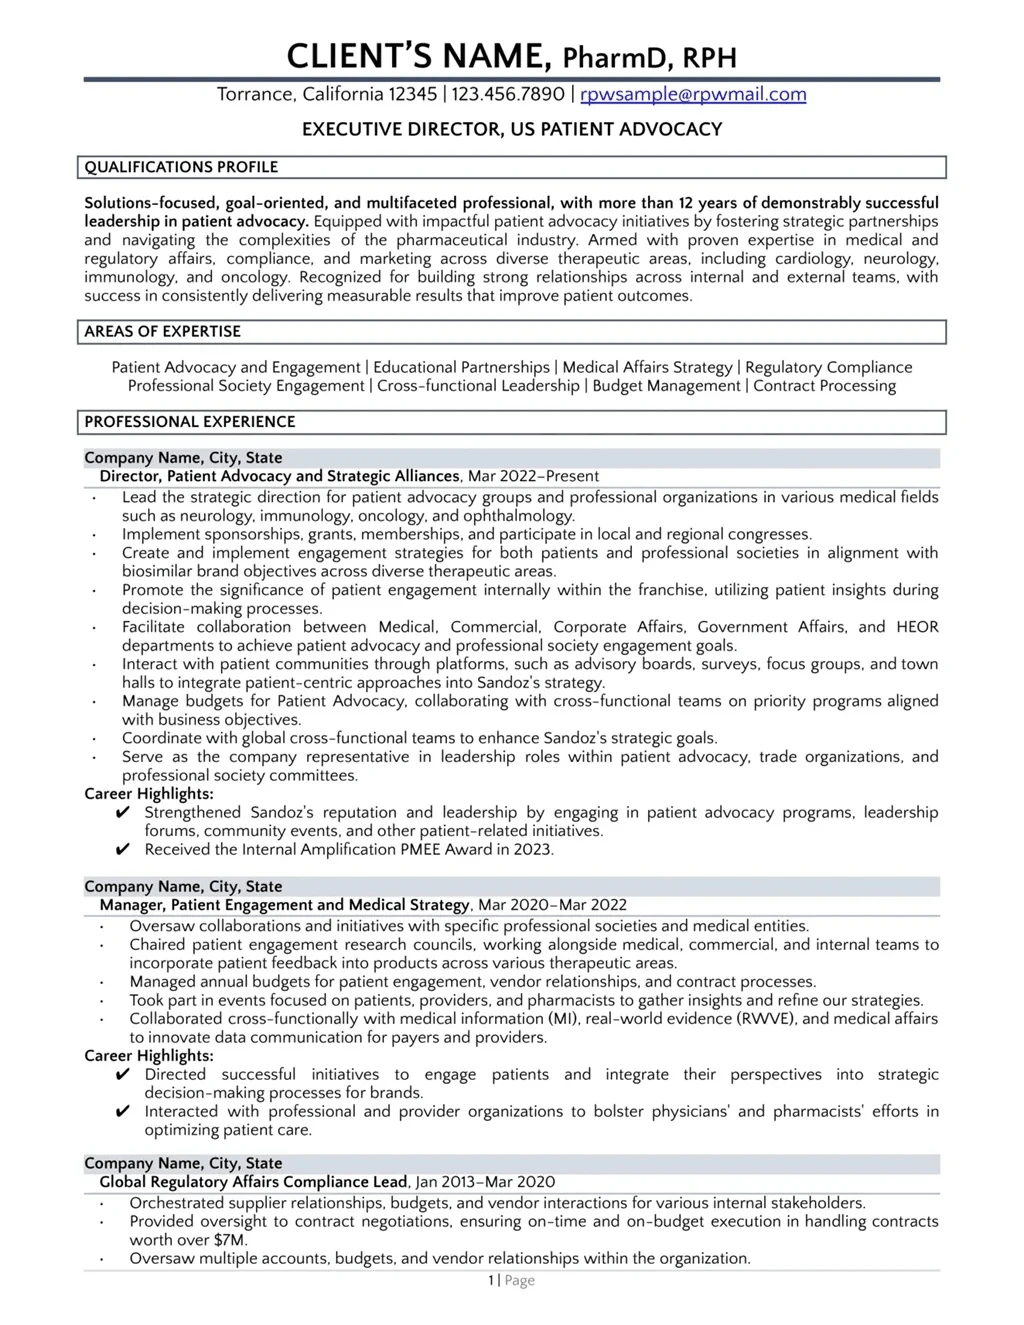 Pharmaceutical Resume Example Page One